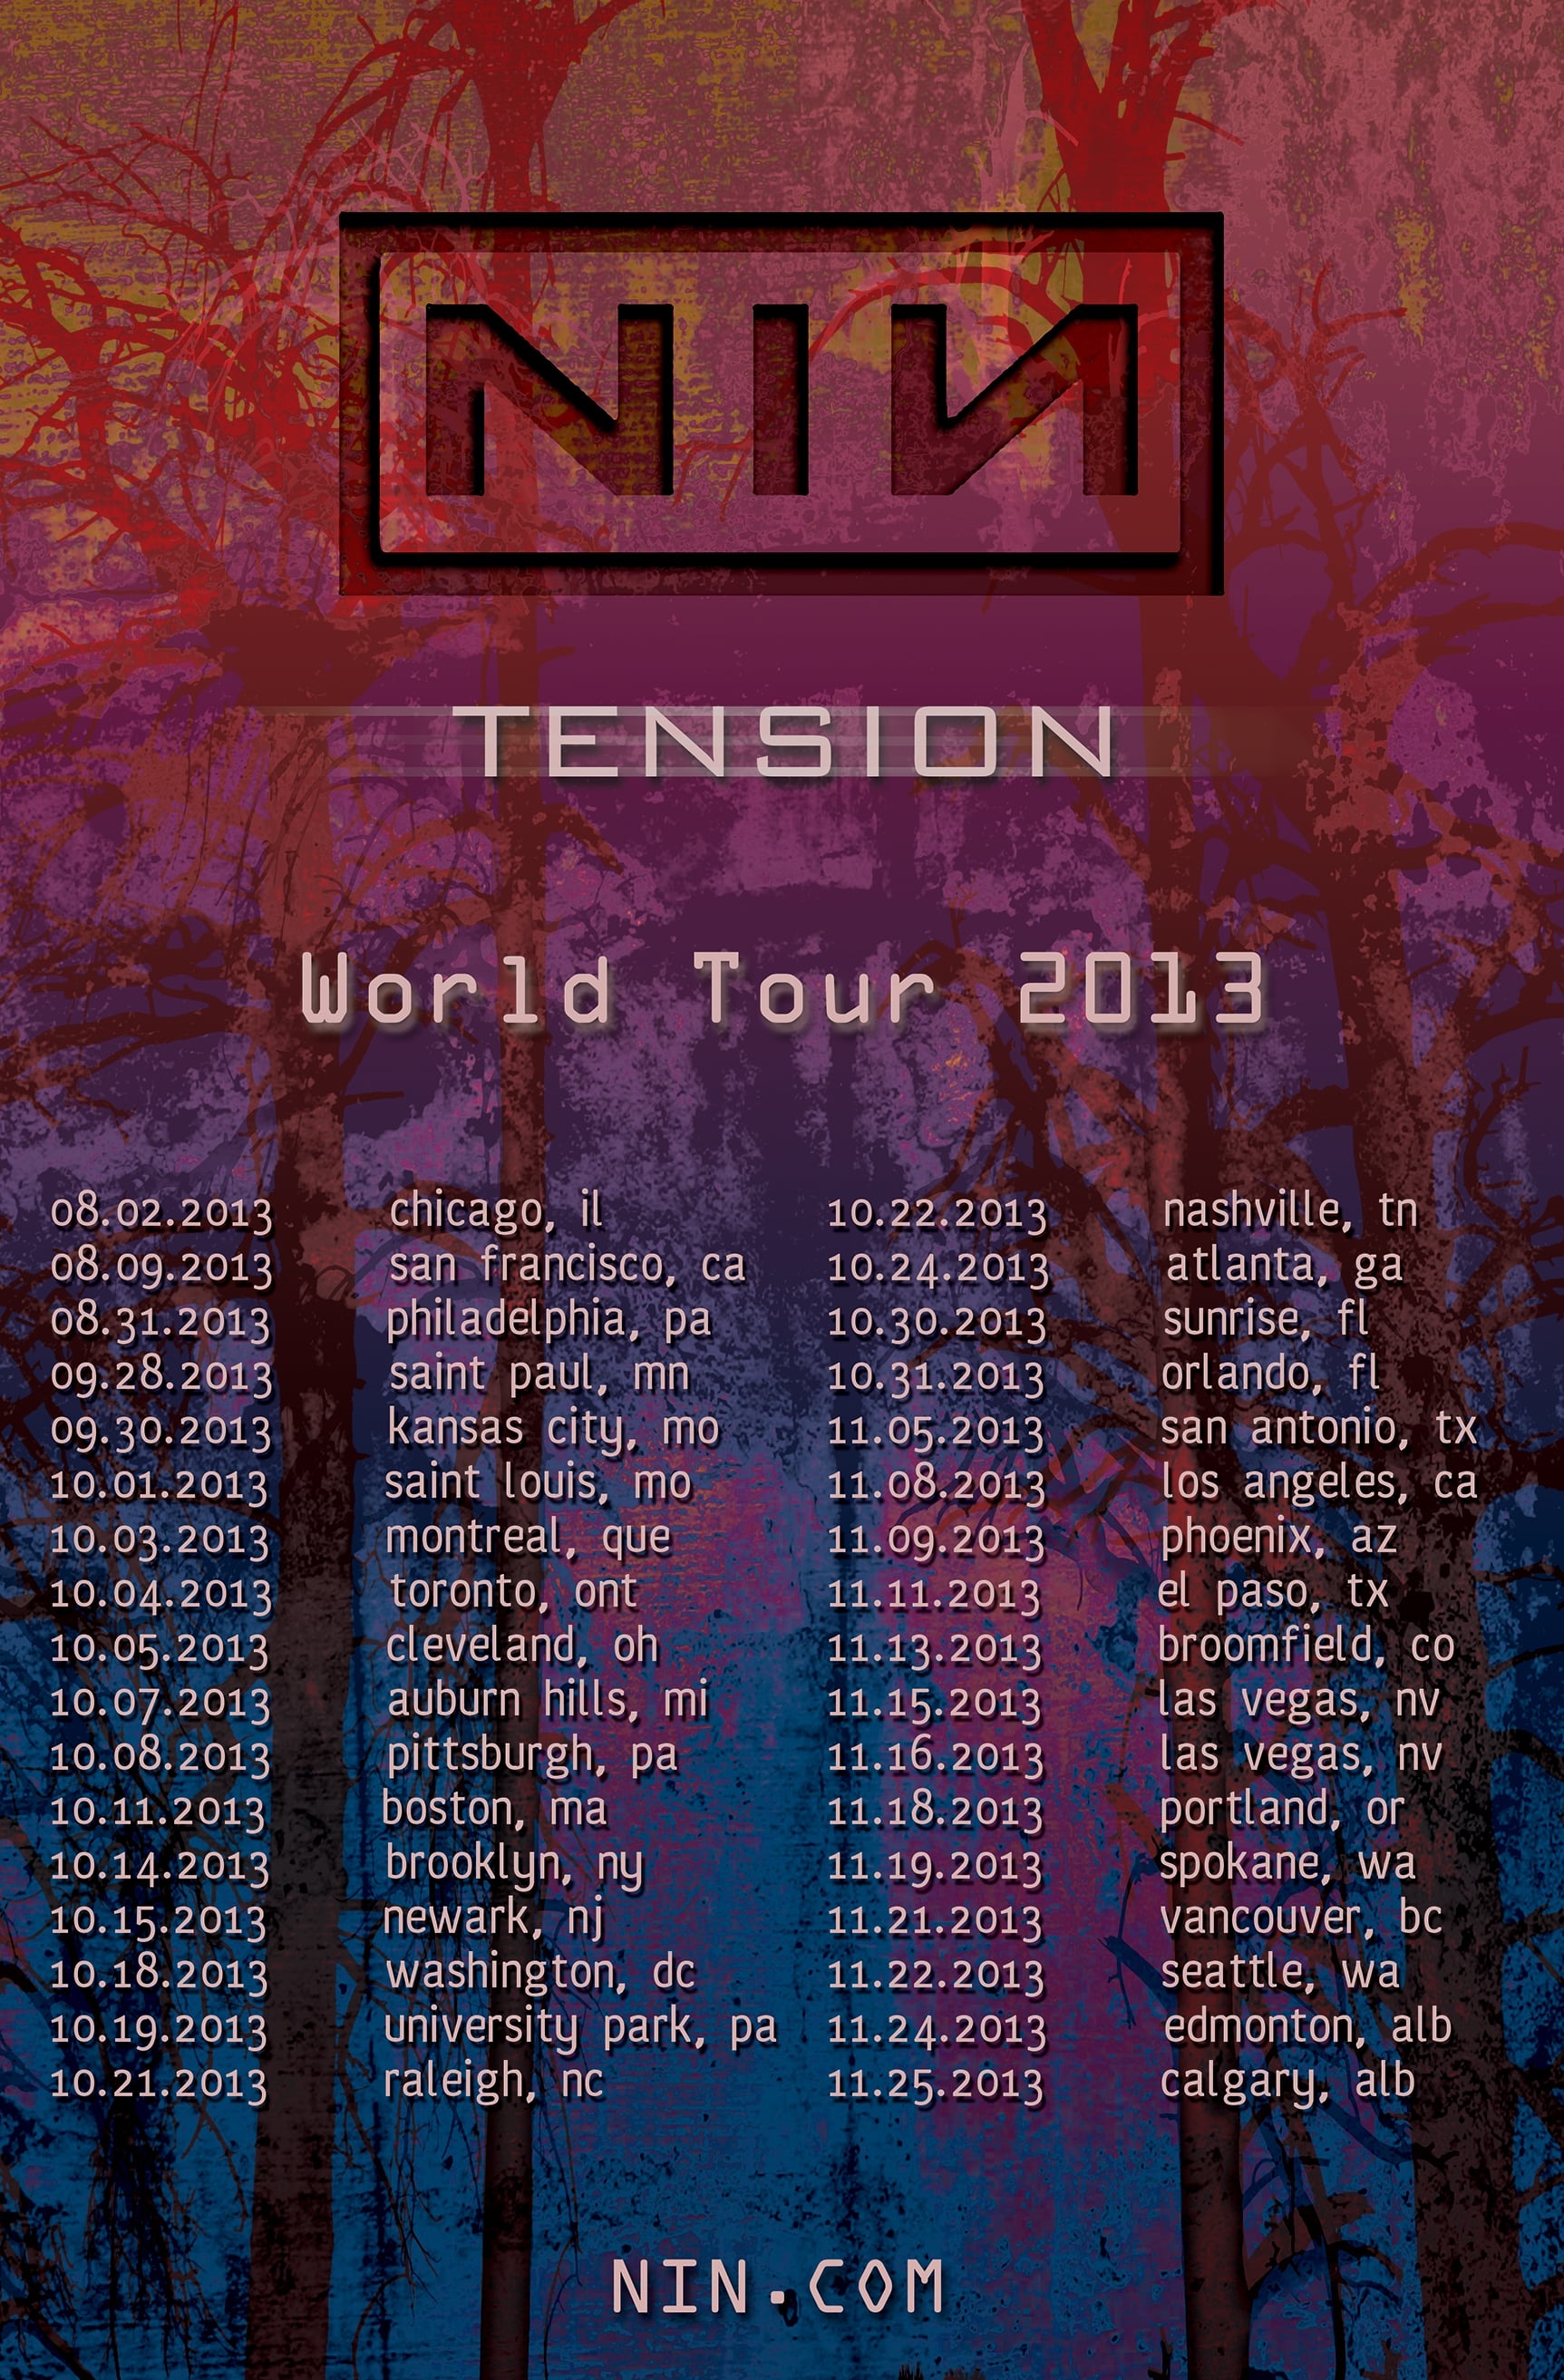 Nine Inch Nails: Tension 2013